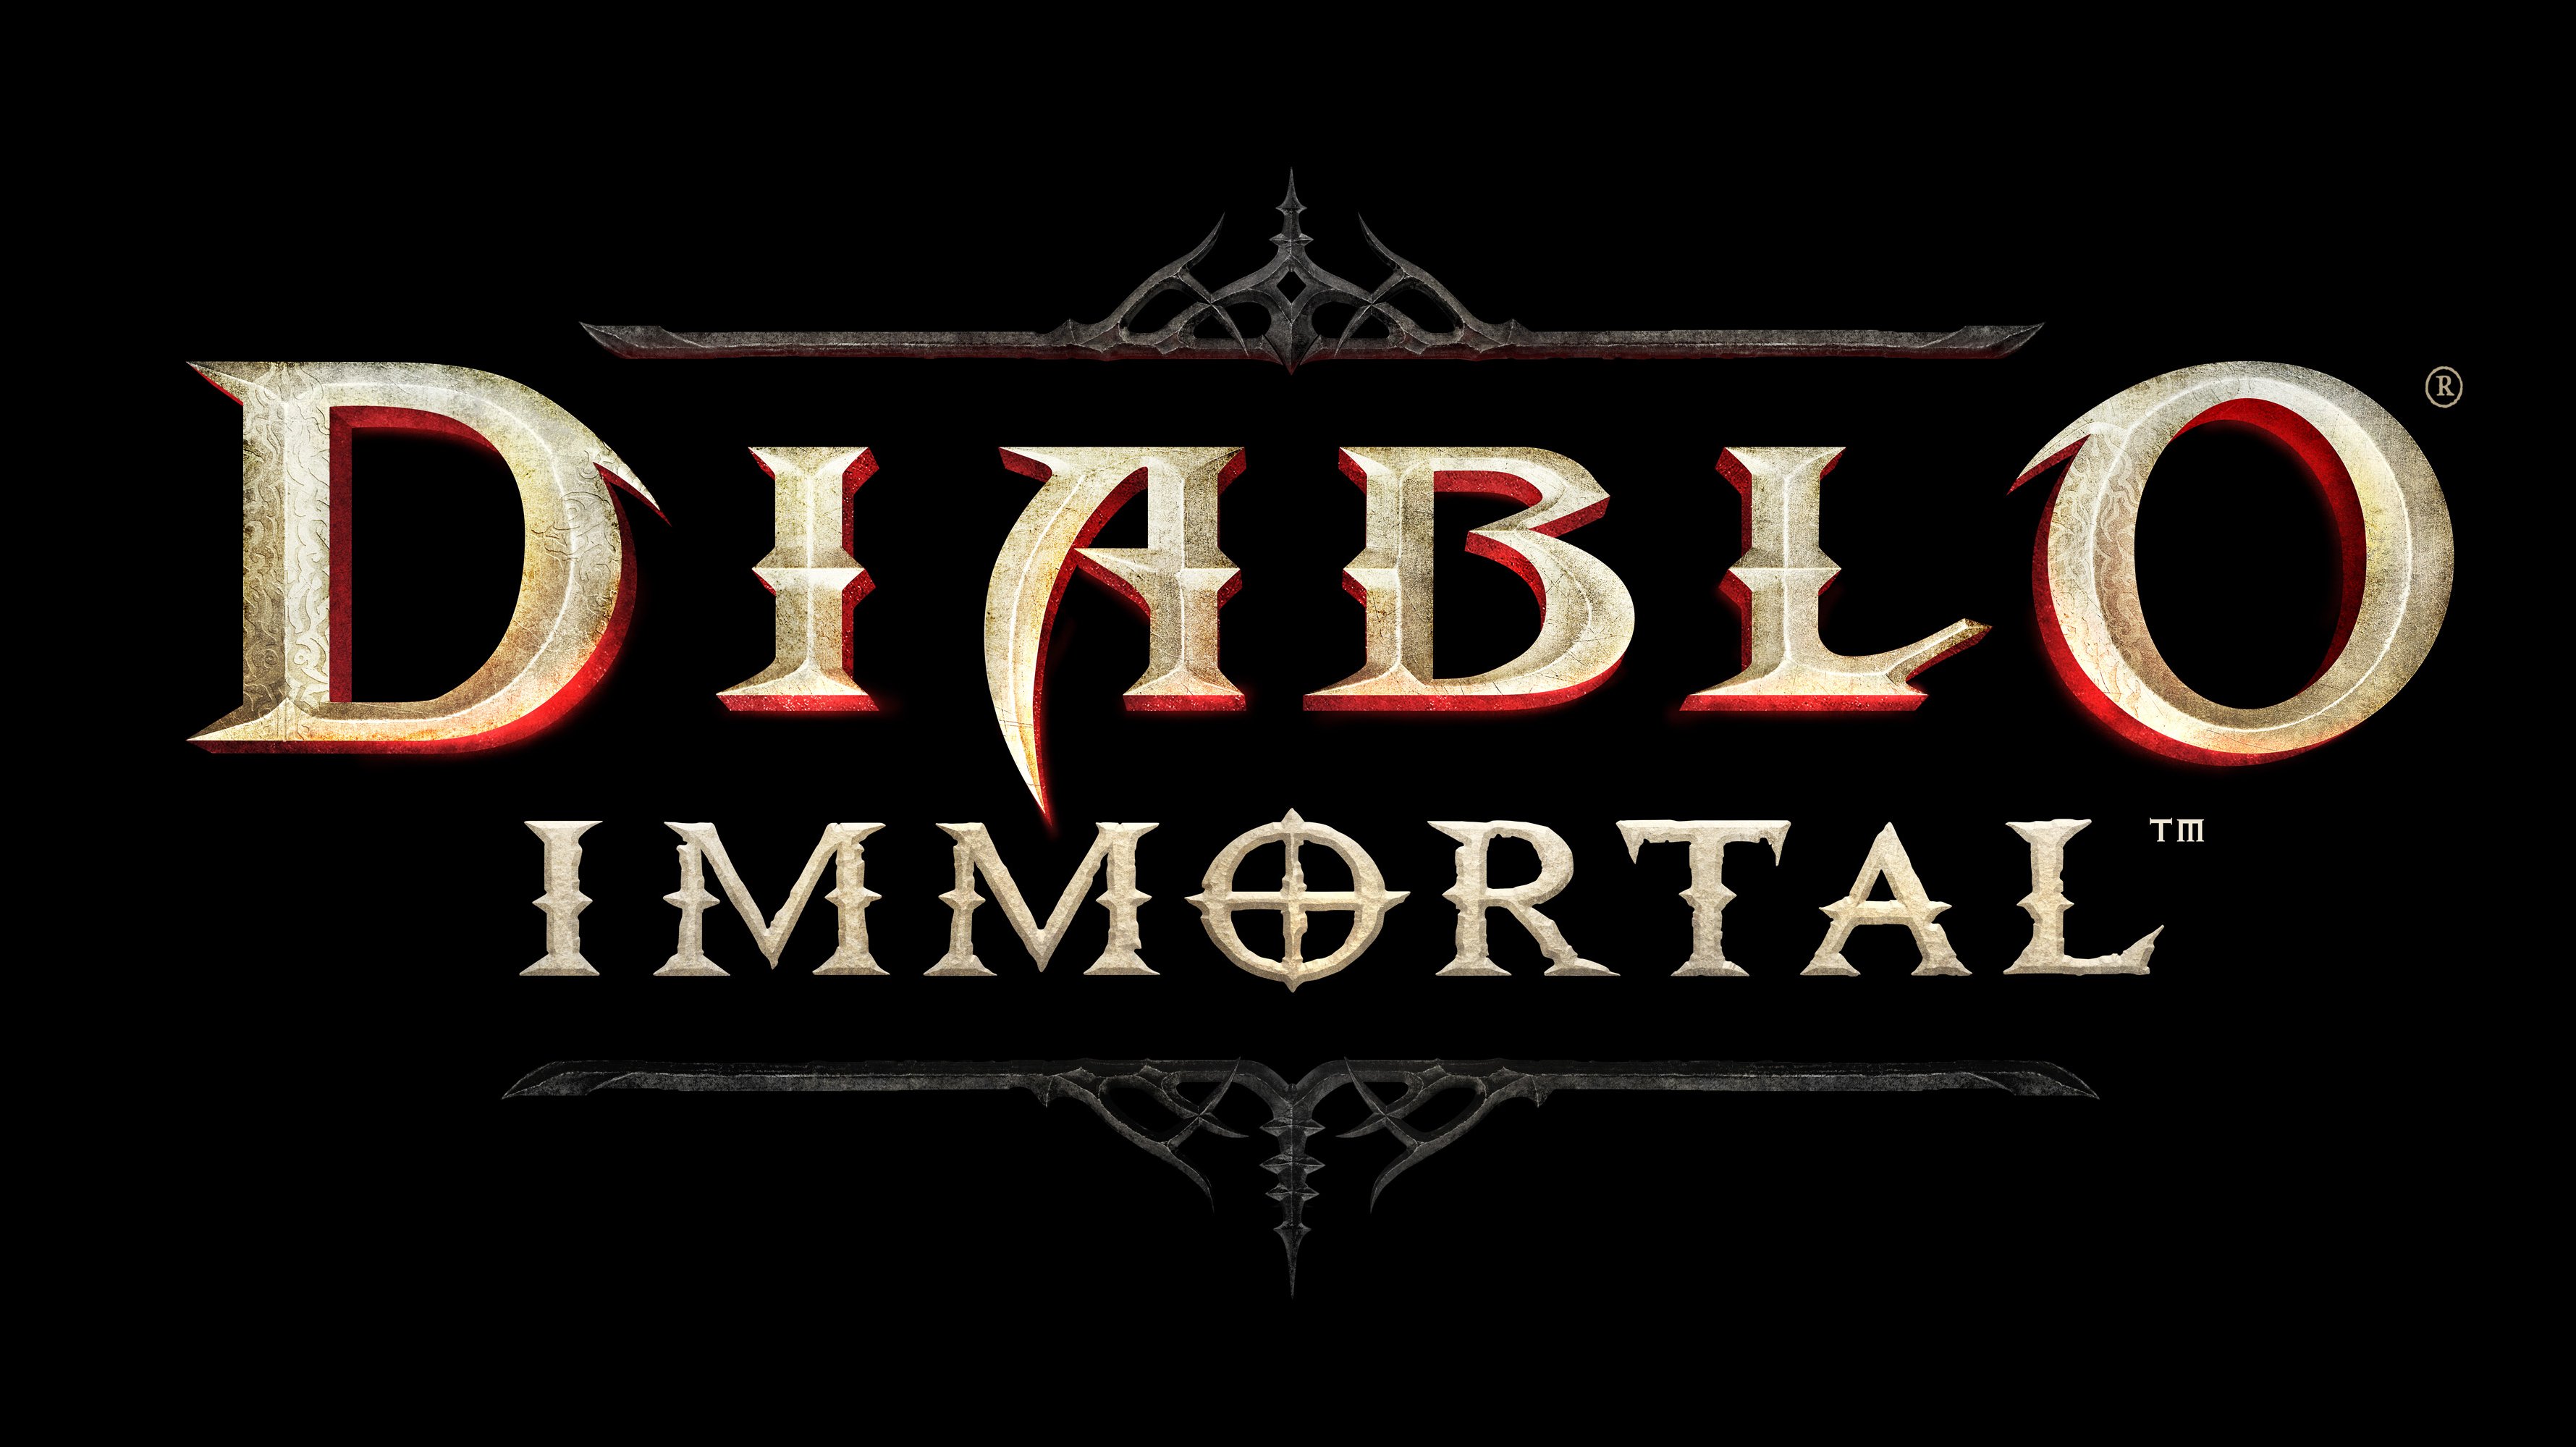 diablo immortal download now on any android device